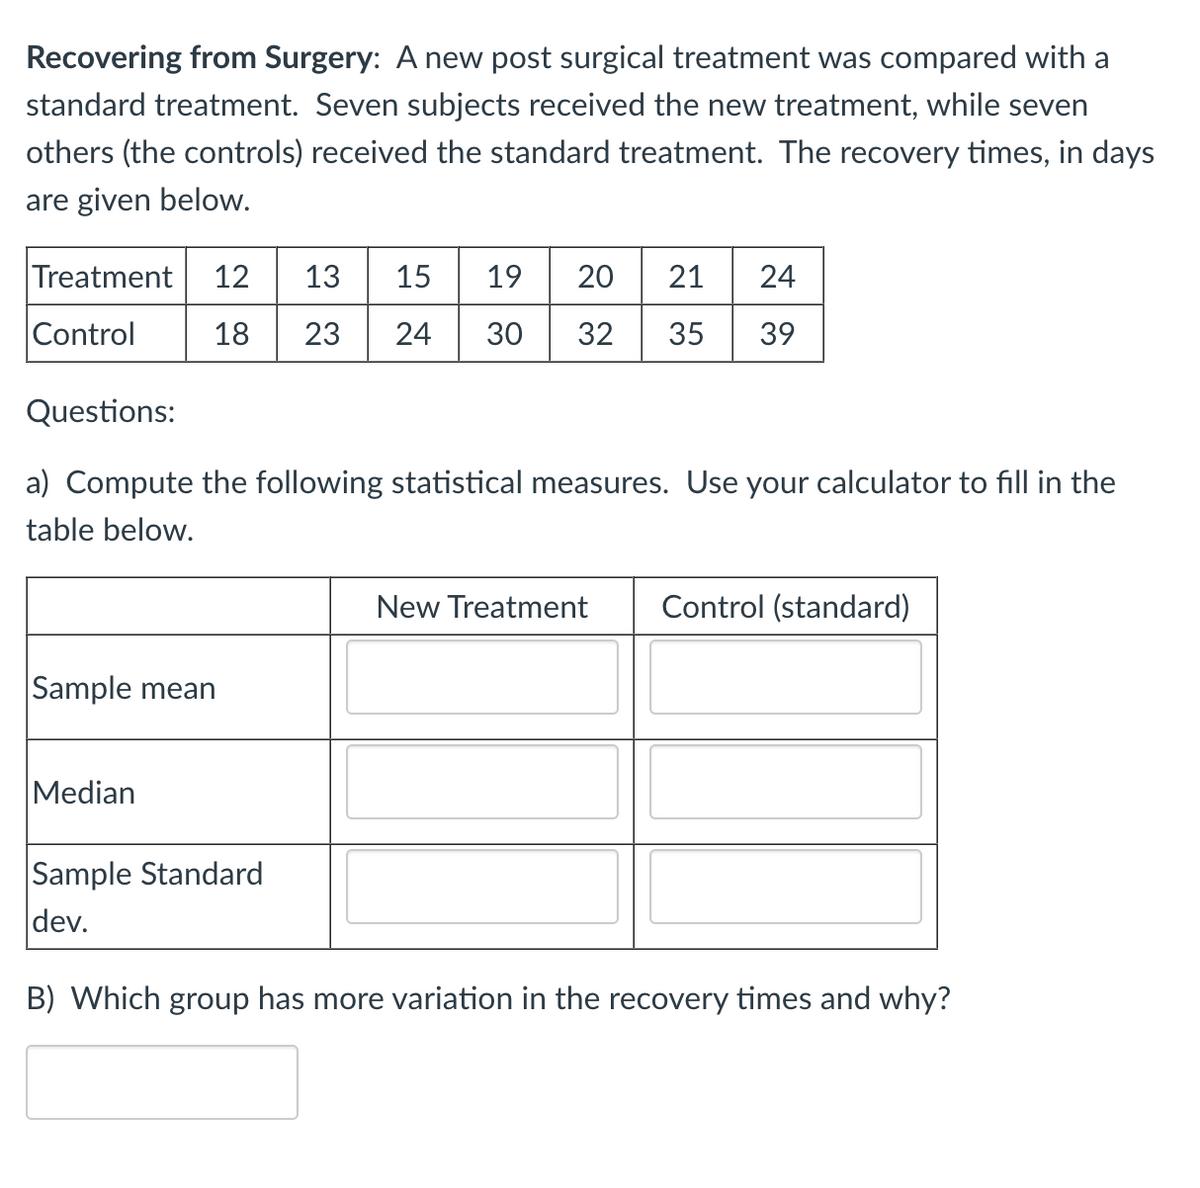 Recovering from Surgery: A new post surgical treatment was compared with a
standard treatment. Seven subjects received the new treatment, while seven
others (the controls) received the standard treatment. The recovery times, in days
are given below.
Treatment 12 13 15 19 20
Control
21 24
18 23 24 30 32 35 39
Questions:
a) Compute the following statistical measures. Use your calculator to fill in the
table below.
Sample mean
Median
Sample Standard
dev.
New Treatment Control (standard)
B) Which group has more variation in the recovery times and why?